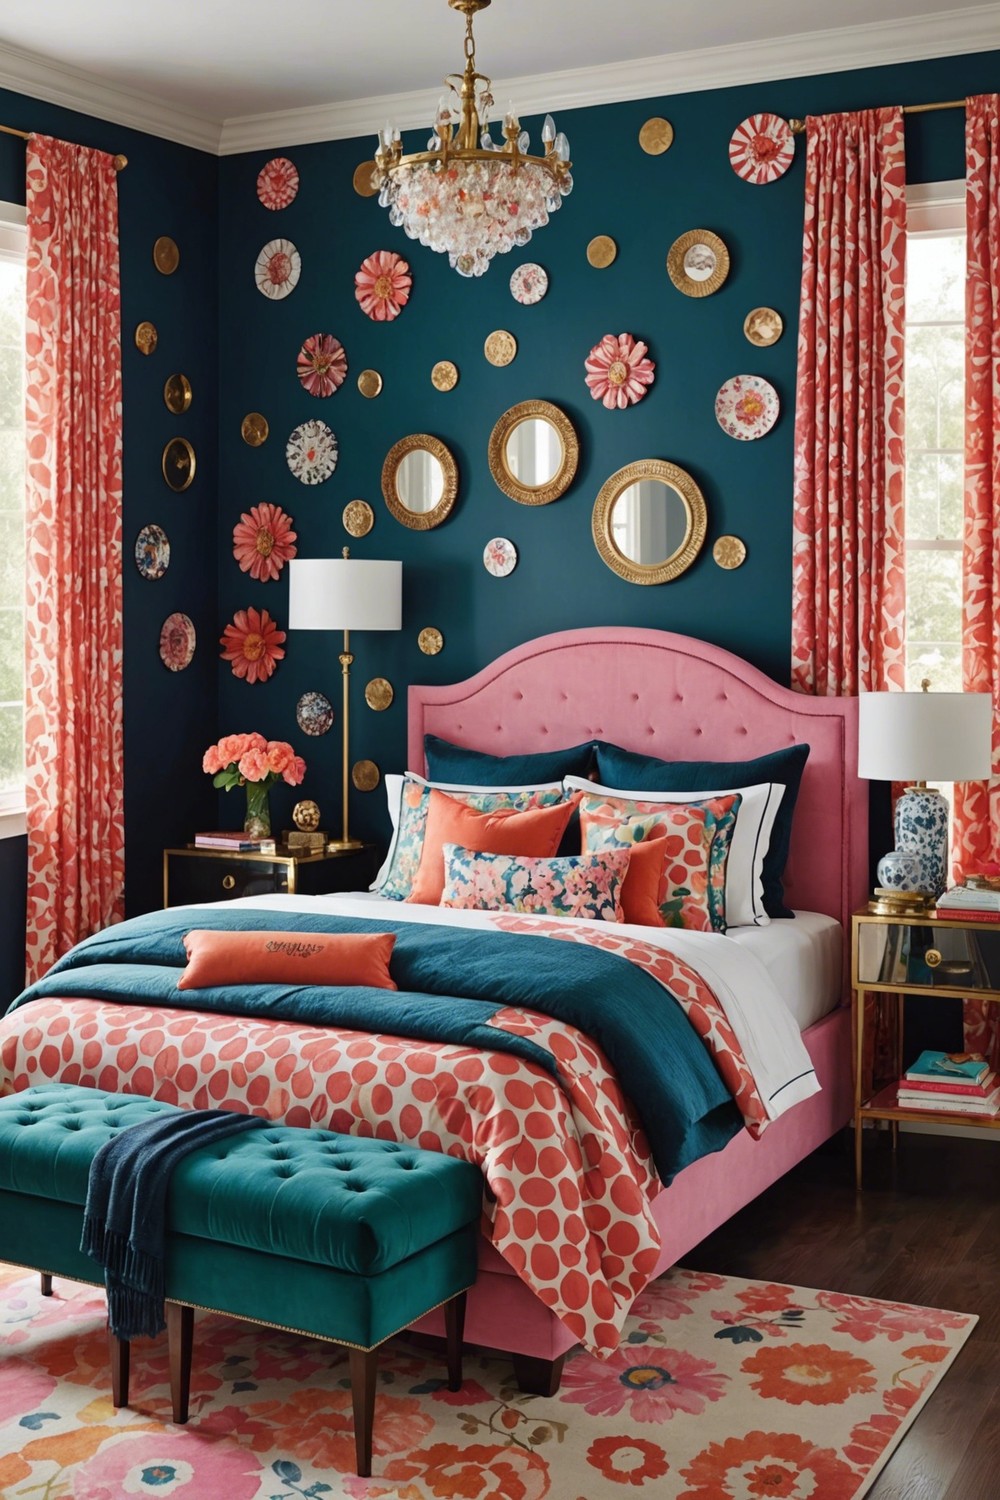 Whimsy Wonderland: Colorful Prints and Playful Patterns